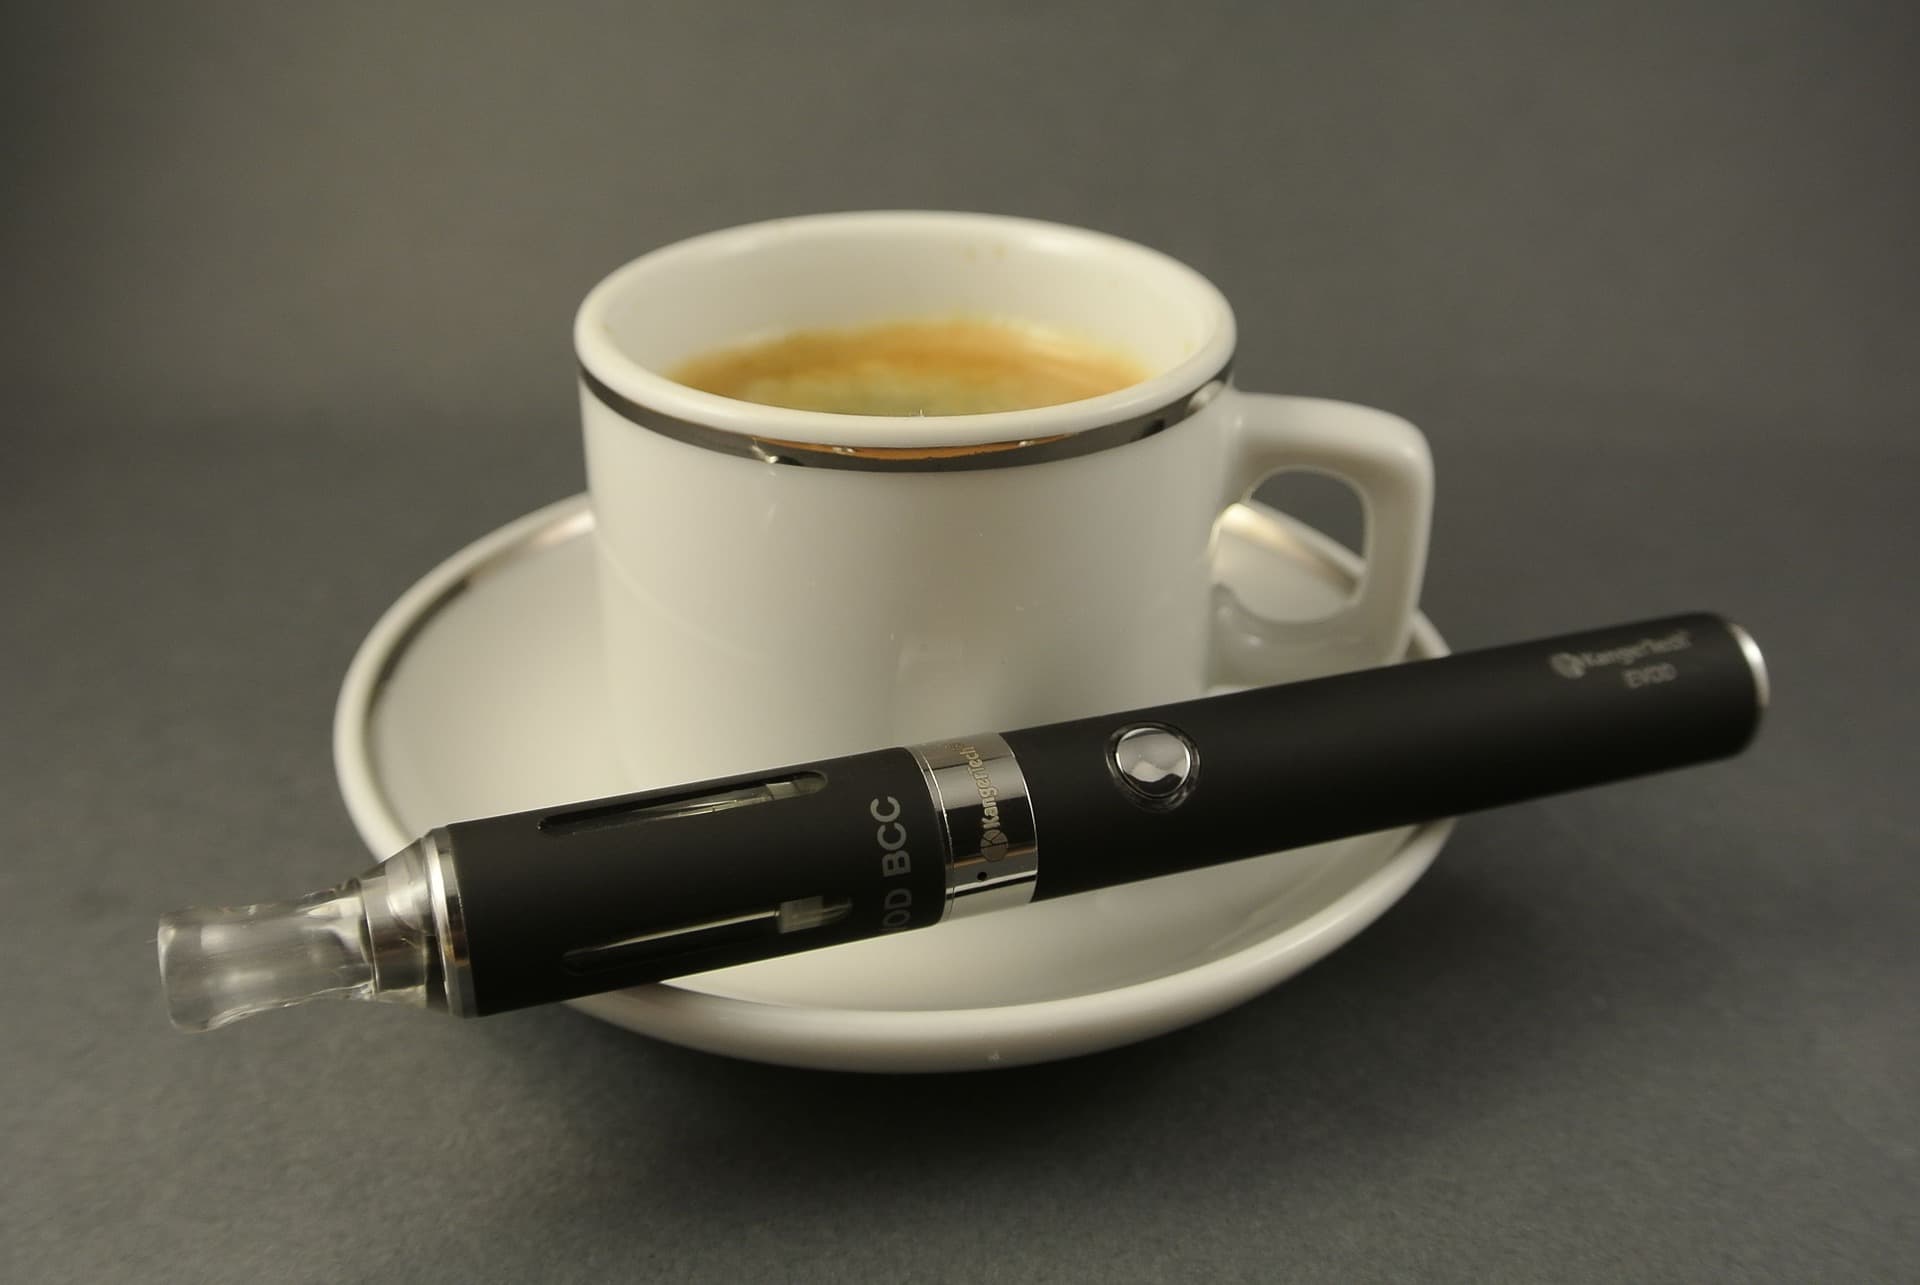 Some Myths About E-Cigarettes